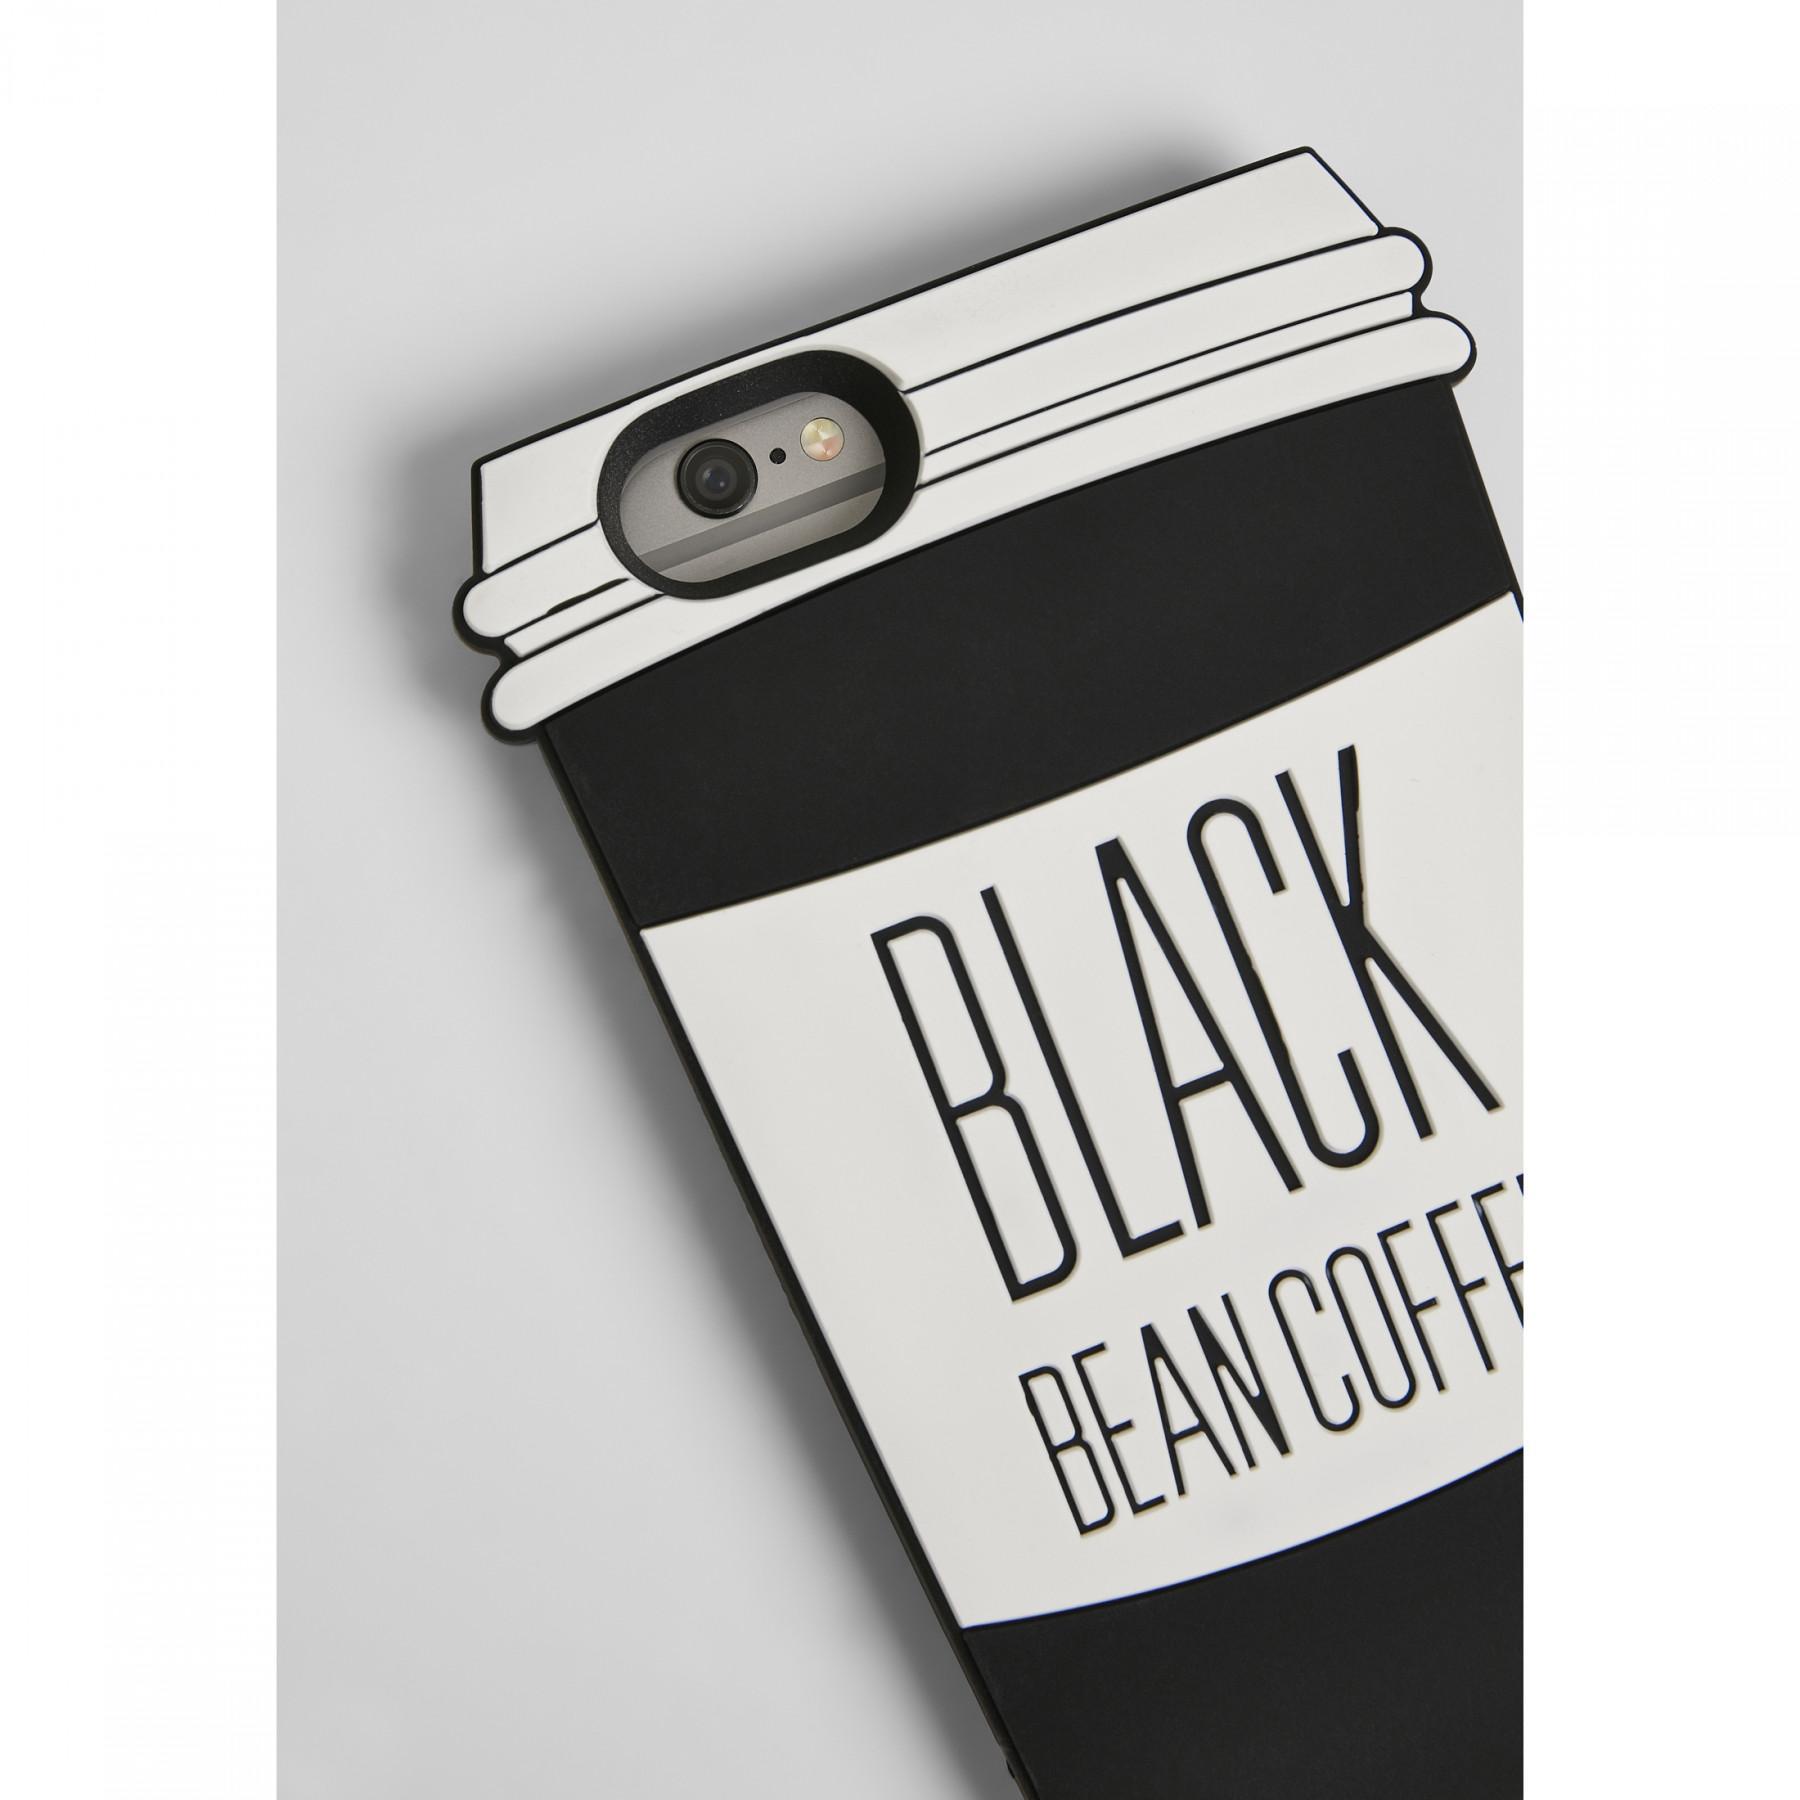 Case for iphone 7/8 - coffe cases - Accessories Tee Mister - Lifestyle Iphone cup